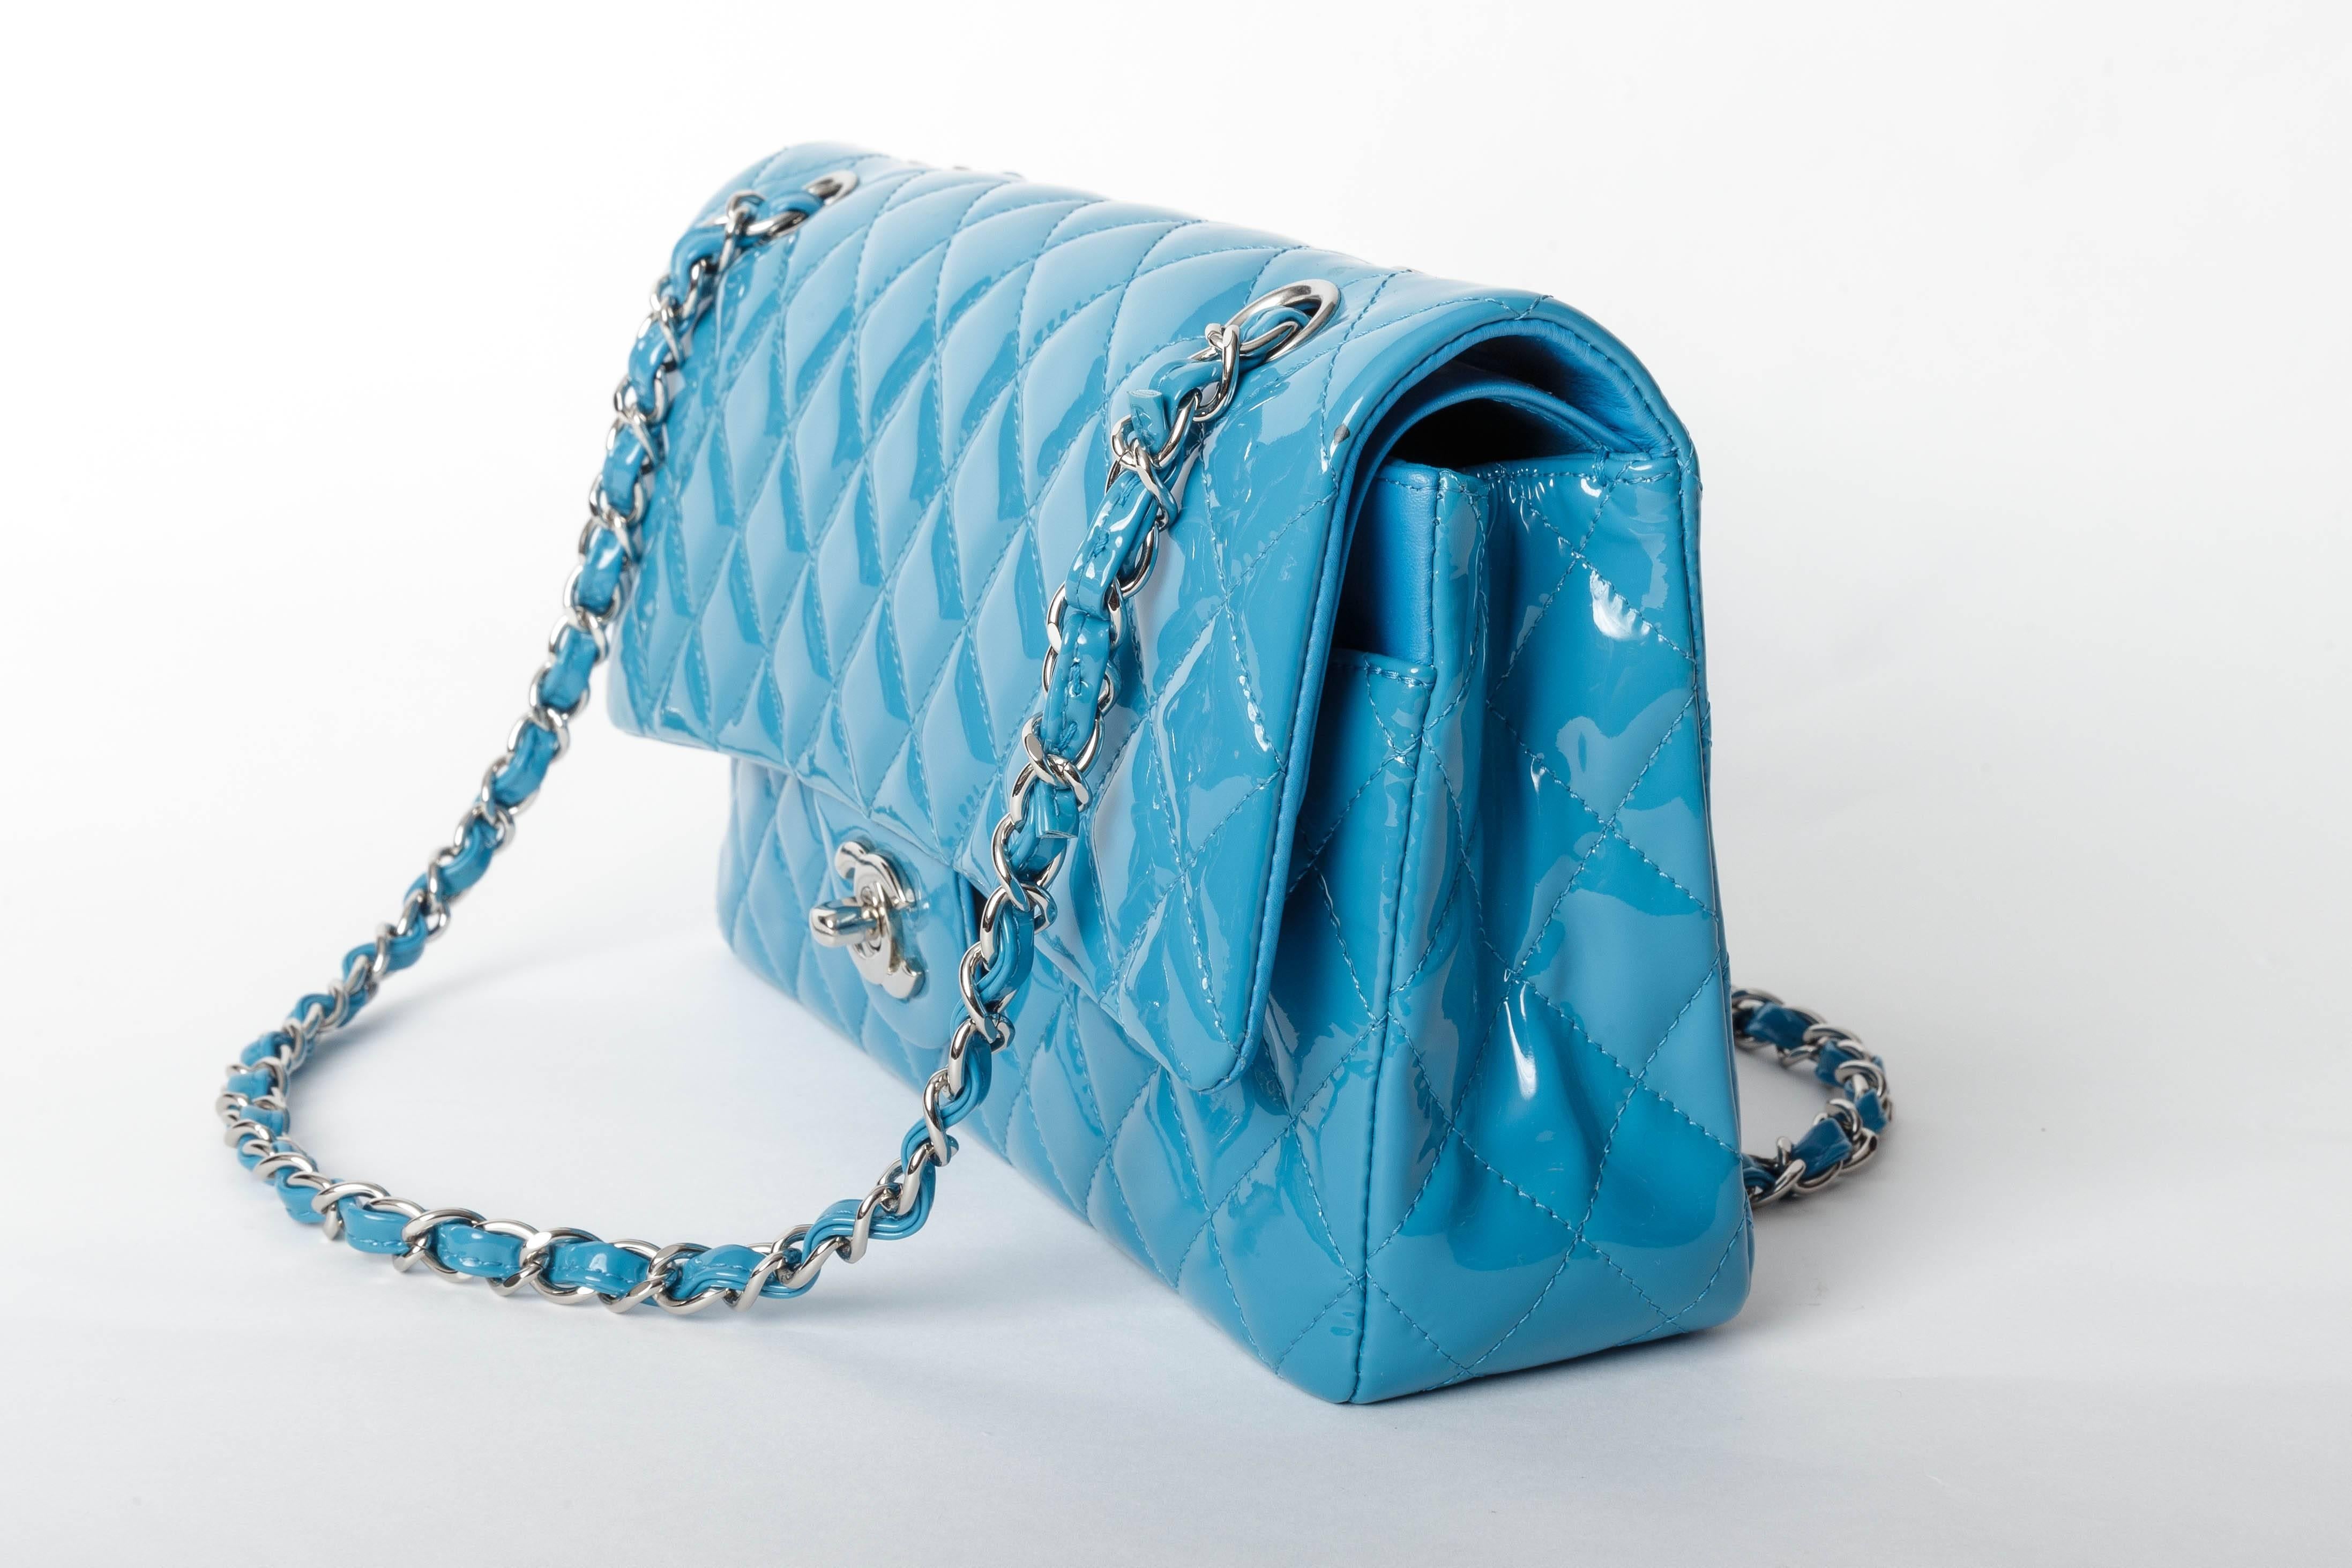 Blue Chanel Teal Patent Medium Classic Double Flap Bag with Silver Hardware